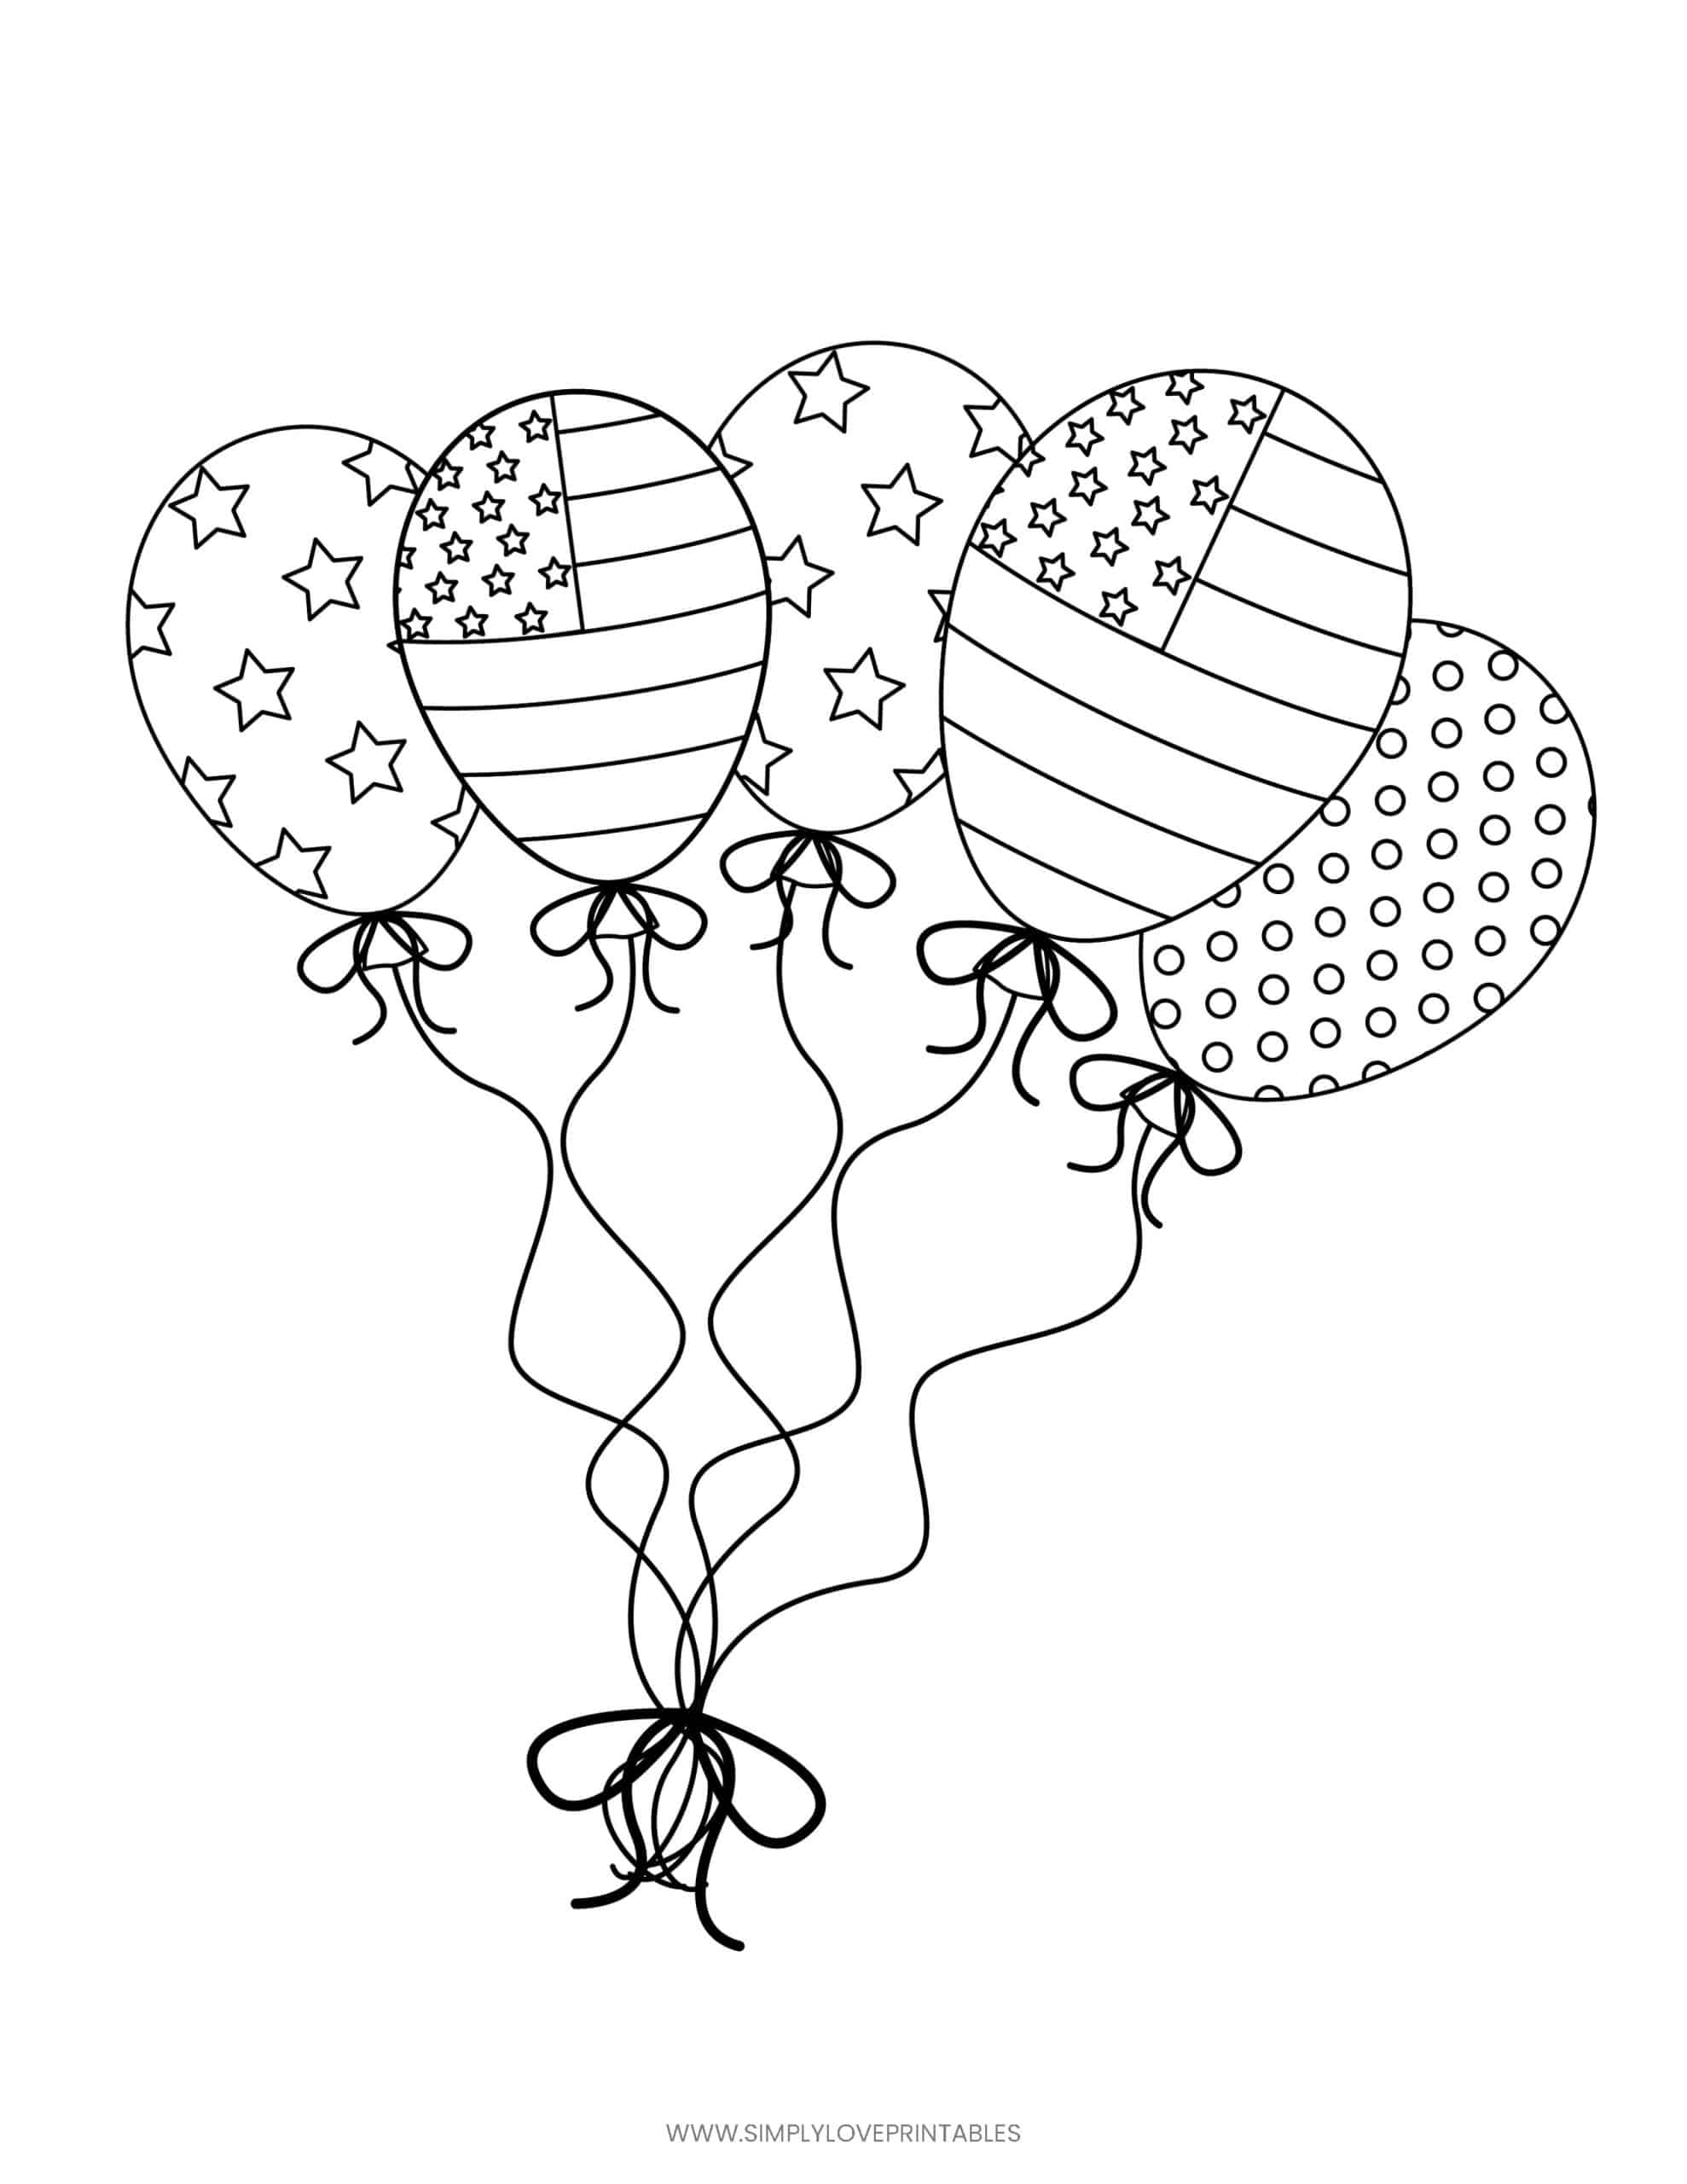 Celebrate Freedom with 4th of July: 180+ Free Coloring Pages 164